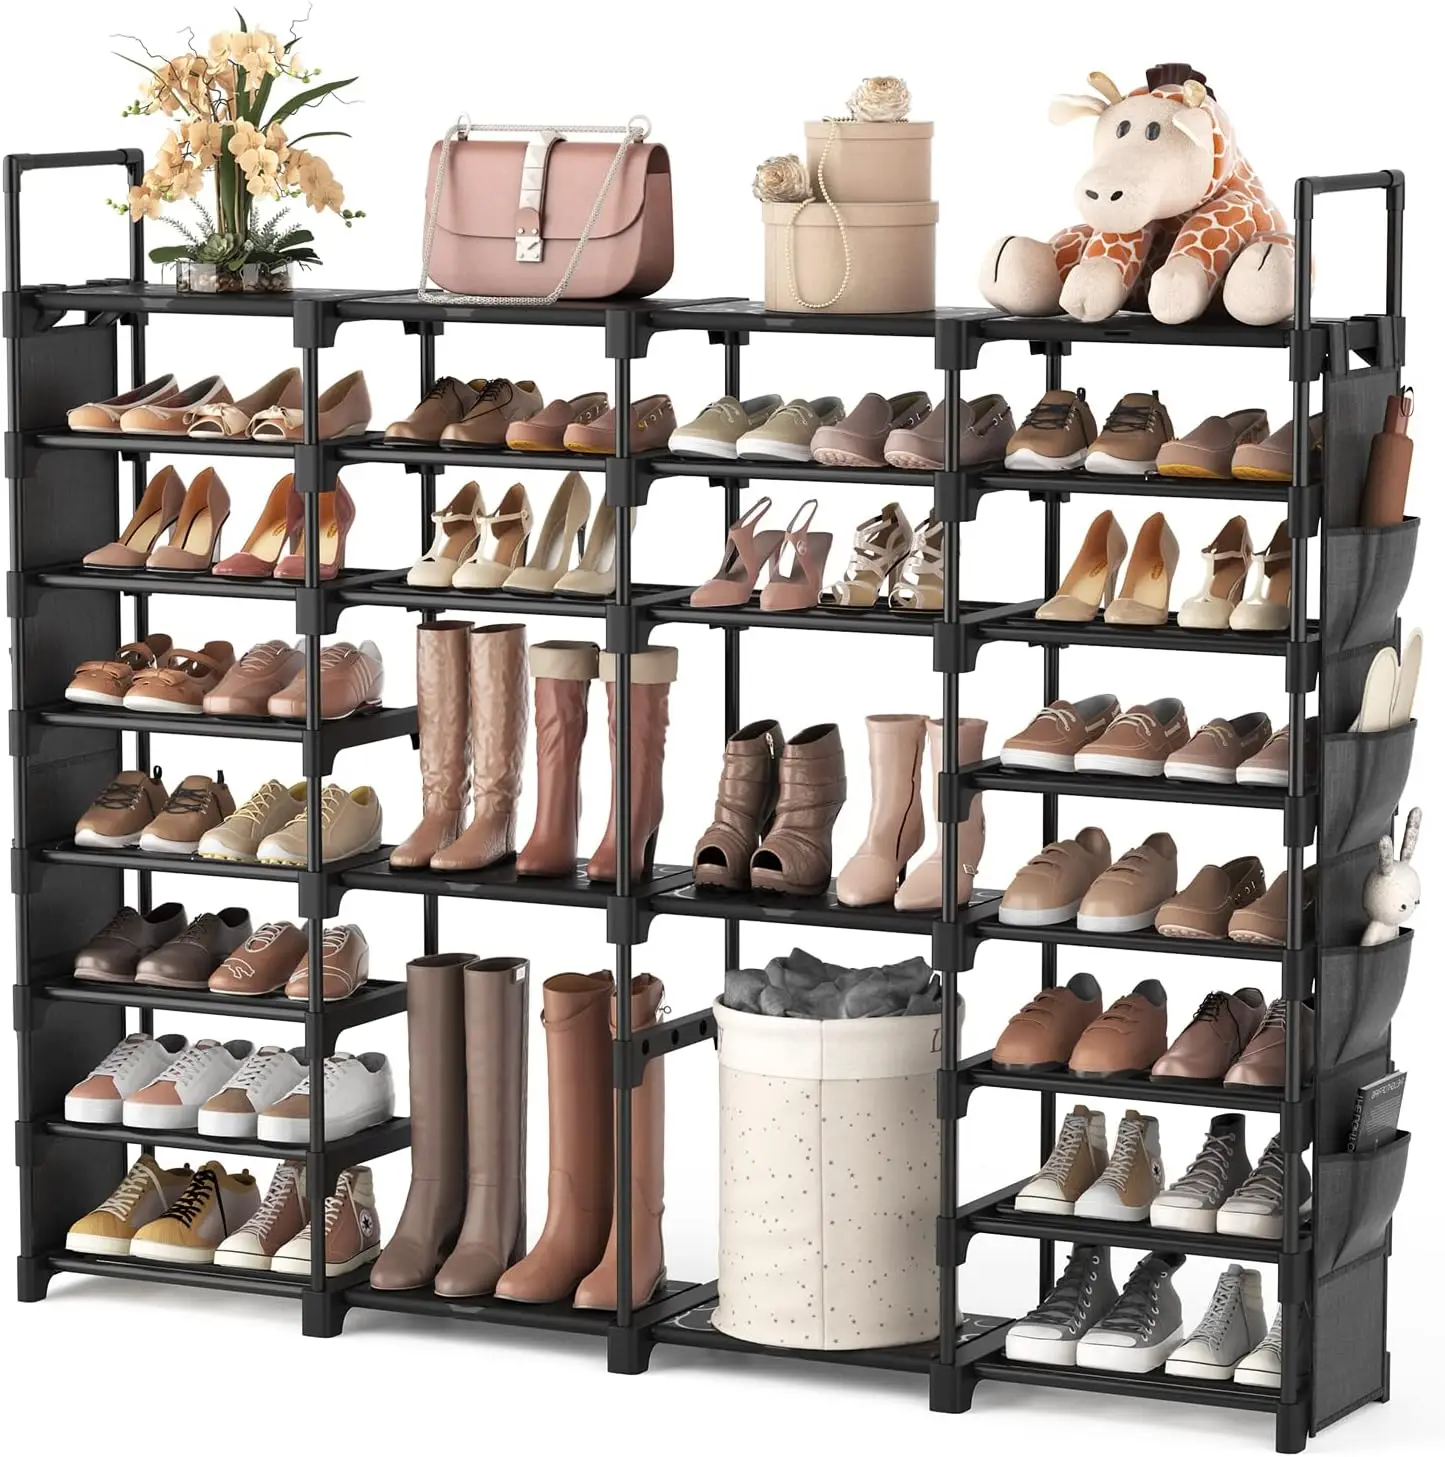 

Shoe Organizer tall metal shoe for Entryway Holds 62-66 Pairs 8 Tiers Space Saving Shoe Shelf Shoes Storage with Side hanging